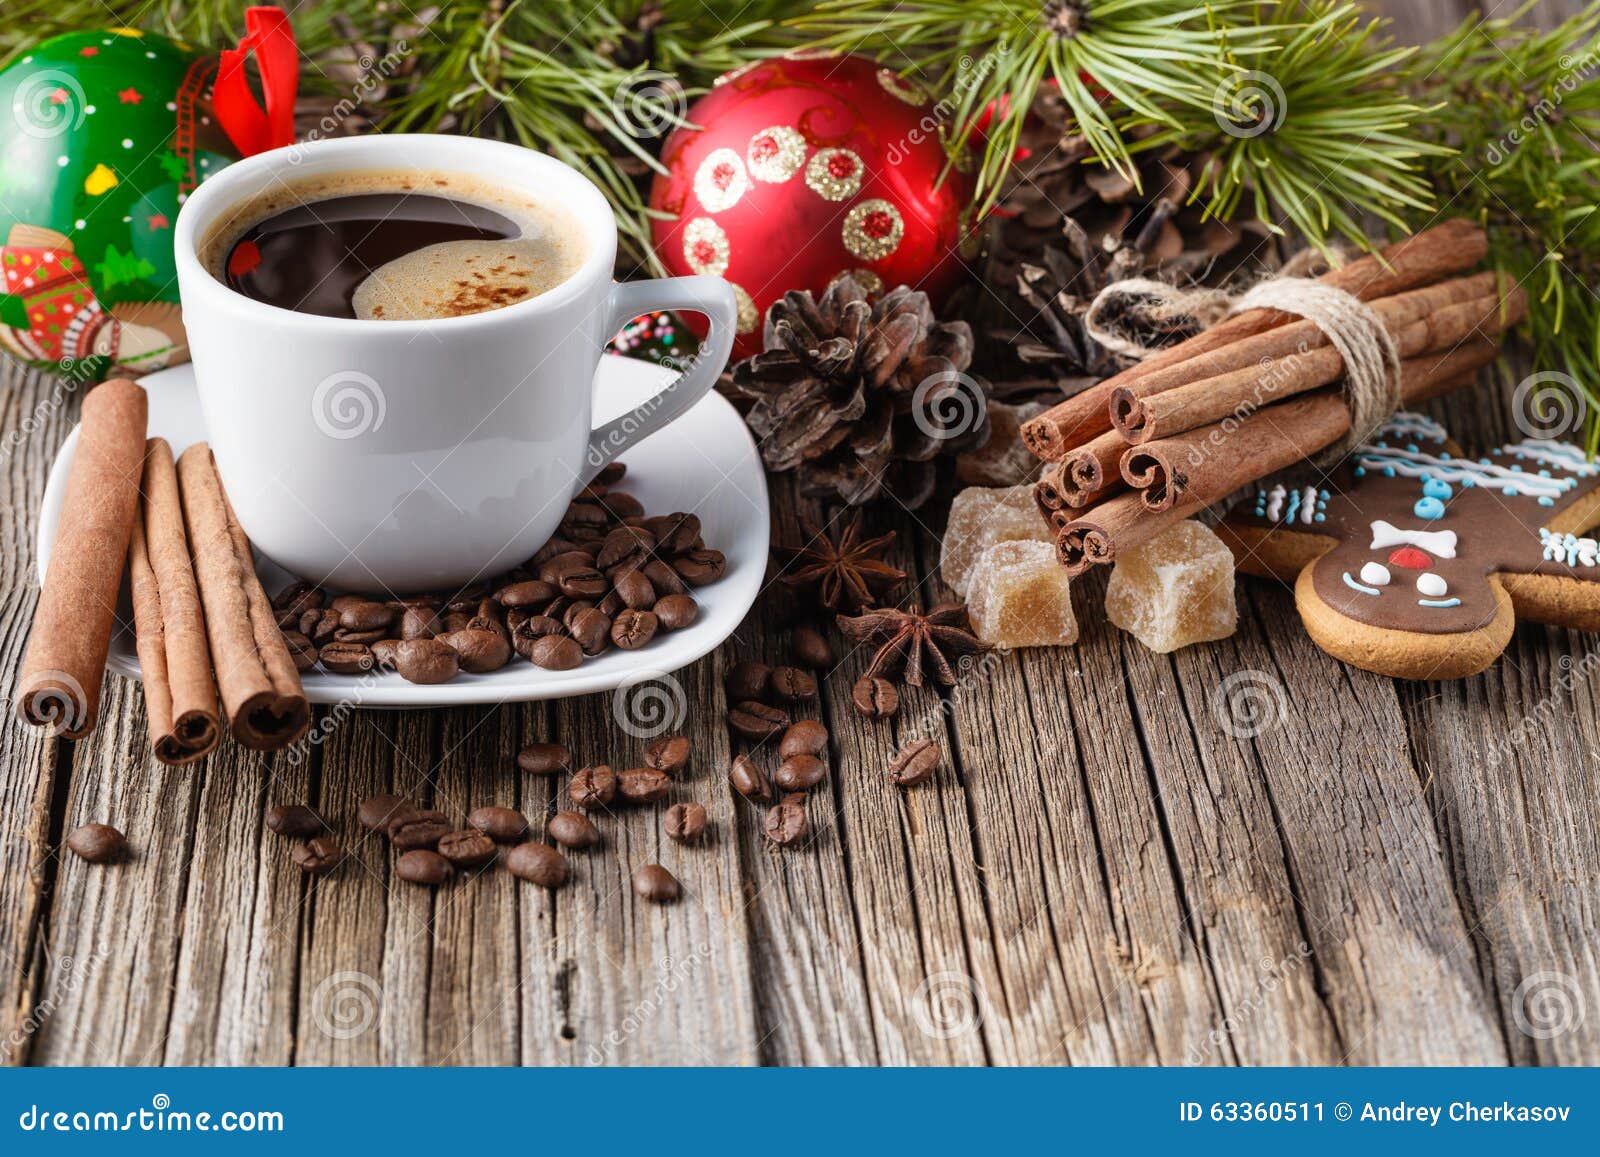 Winter Cozy Evening Heating Coffee Cup Stock Image - Image of ...